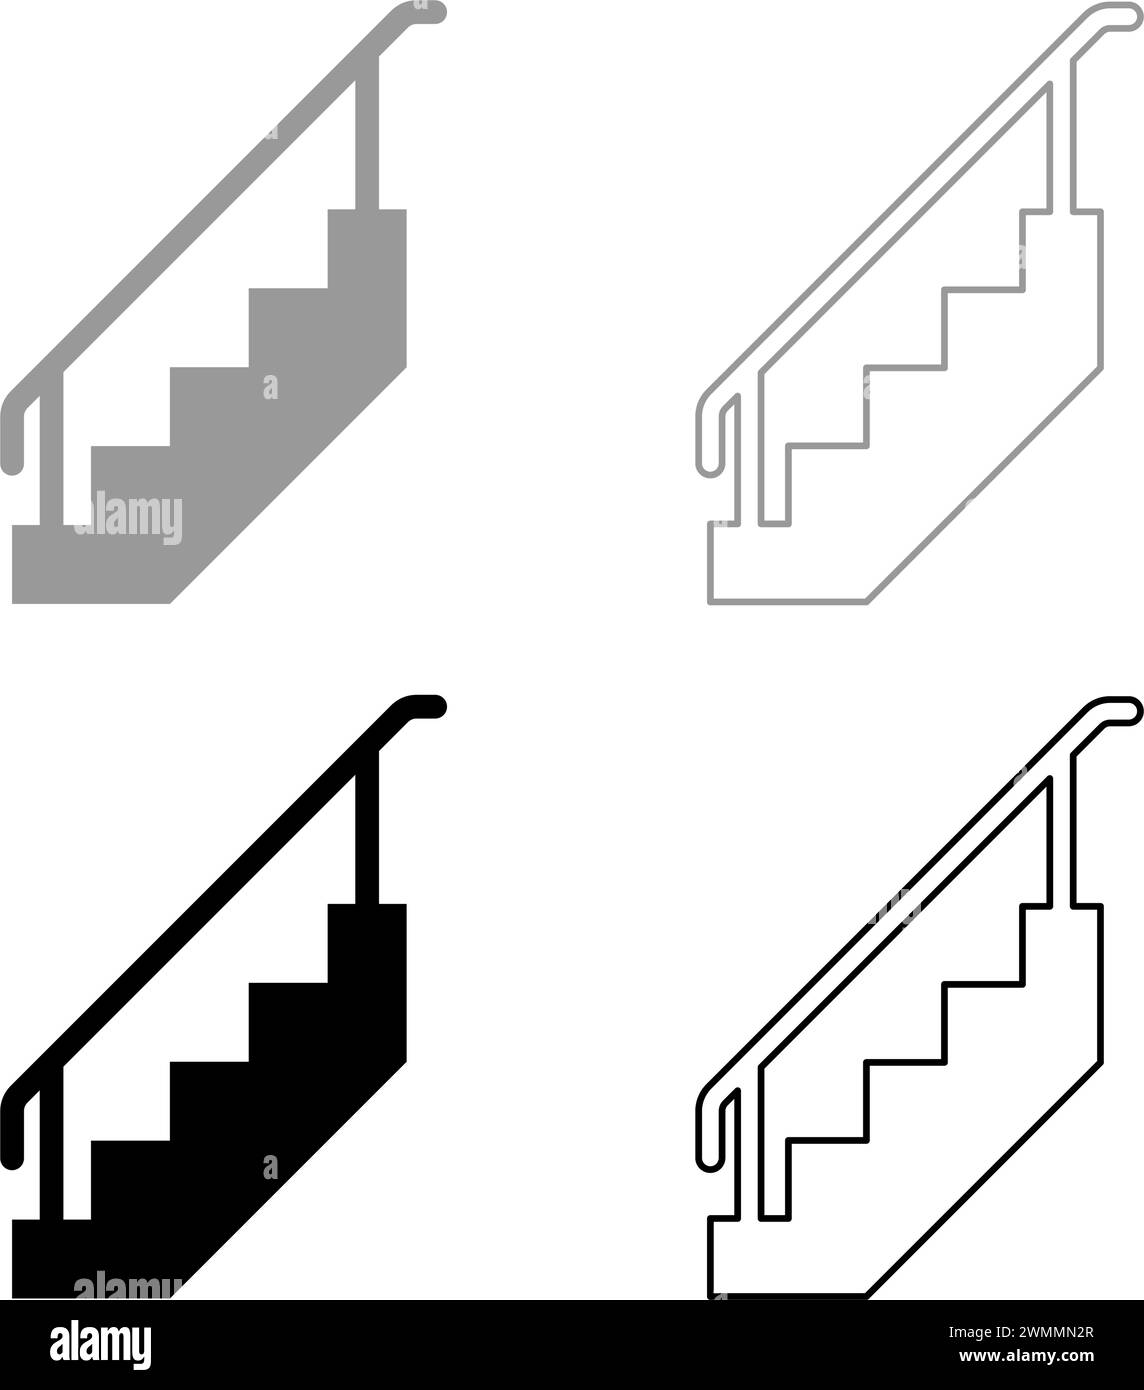 Staircase with railings stairs with handrail ladder fence stairway set icon grey black color vector illustration image simple solid fill outline Stock Vector